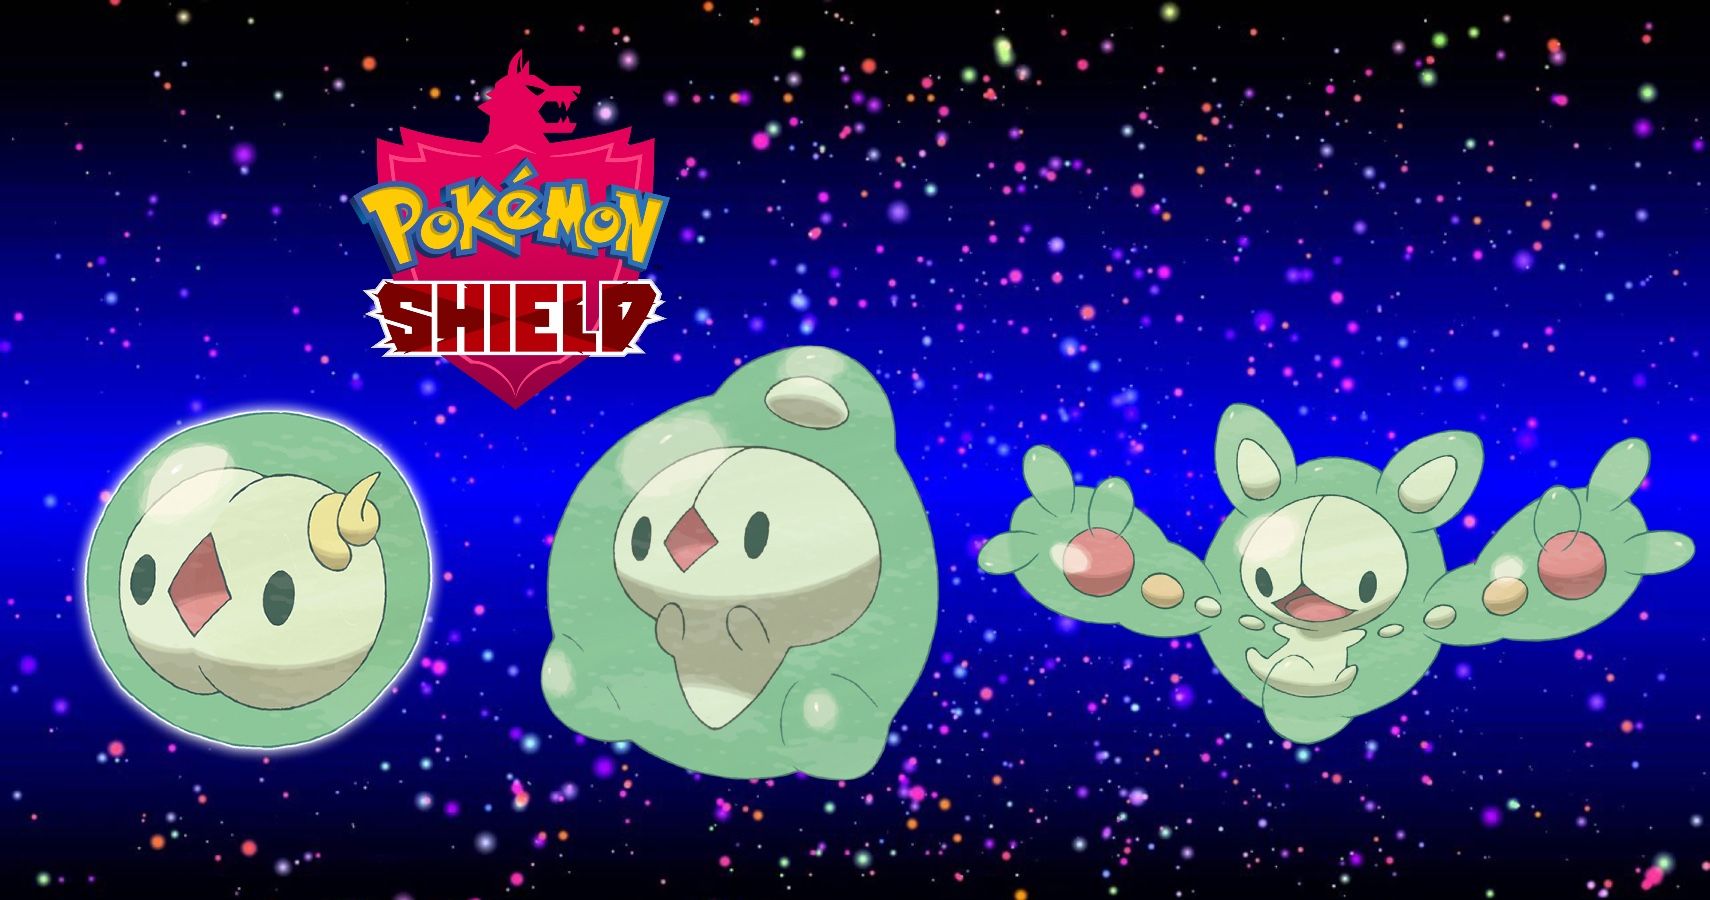 Pokémon Sword & Shield How To Find & Evolve Solosis Into Reuniclus